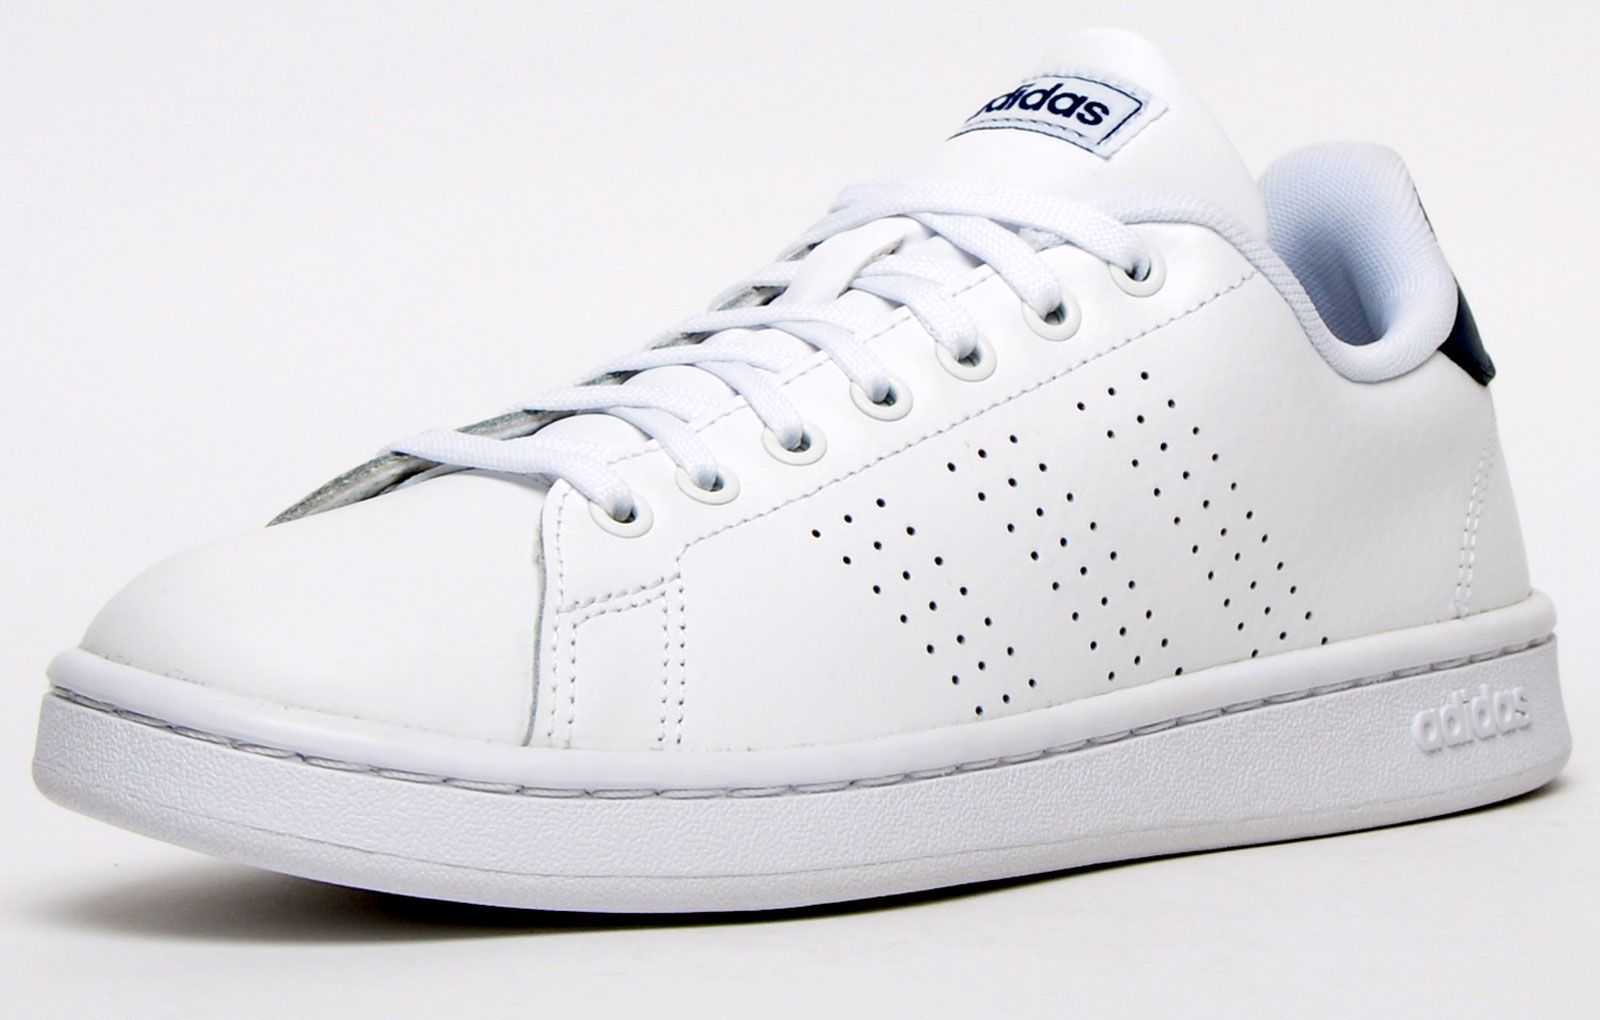 Step out in unbeatable Adidas style with this new in Adidas Advantage lifestyle trainer. These Adidas trainers have a vintage styled throwback court look with improved modern comfort. Designed in an on-trend crisp clean white colourway and detailed with perforated 3-stripes to the side for a luxe designer led finish. The contrasting navy trims show of the visual aesthetics of this classic trainer while the padded heel and ankle collar, plus the super comfy cloudfoam comfort insole moulds the trainer to your foot for superior step in comfort throughout your daily wear.
 - Leather / synthetic upper 
 - Secure up front lace fastening 
 - Cloudfoam cushioned insole offers comfort 
 - Textured vintage styled sole unit
 - Adidas branding throughout
Please Note: 
These Adidas trainers are sold as B grades which means there may be some very slight cosmetic issues on the shoe and they come in a white Adidas box with on most occasions the Adidas brand authenticity details attached to them. There could occasional be issues with wrong swing tags being allocated to wrong shoes by Adidas themselves which could result in some size confusion but you must take the size IN THE SHOE as the size that the shoe actually is ( not what is on the tag ). We have checked most of the shoes and in our opinion, all are practically perfect without any blemishes on them at all and in essence if the shoes did not have the letter B denoted on the swing tag you would presume these were perfect shoes. All shoes are guaranteed against fair wear and tear and offer a substantial saving against the normal high street price. The overall function or performance of the shoe will not be affected by any minor cosmetic issues. B Grades are original authentic products released by the brand manufacturer with their approval at greatly reduced prices. If you are unhappy with your purchase, we will be more than happy to take the shoes back from you and issue a full refund